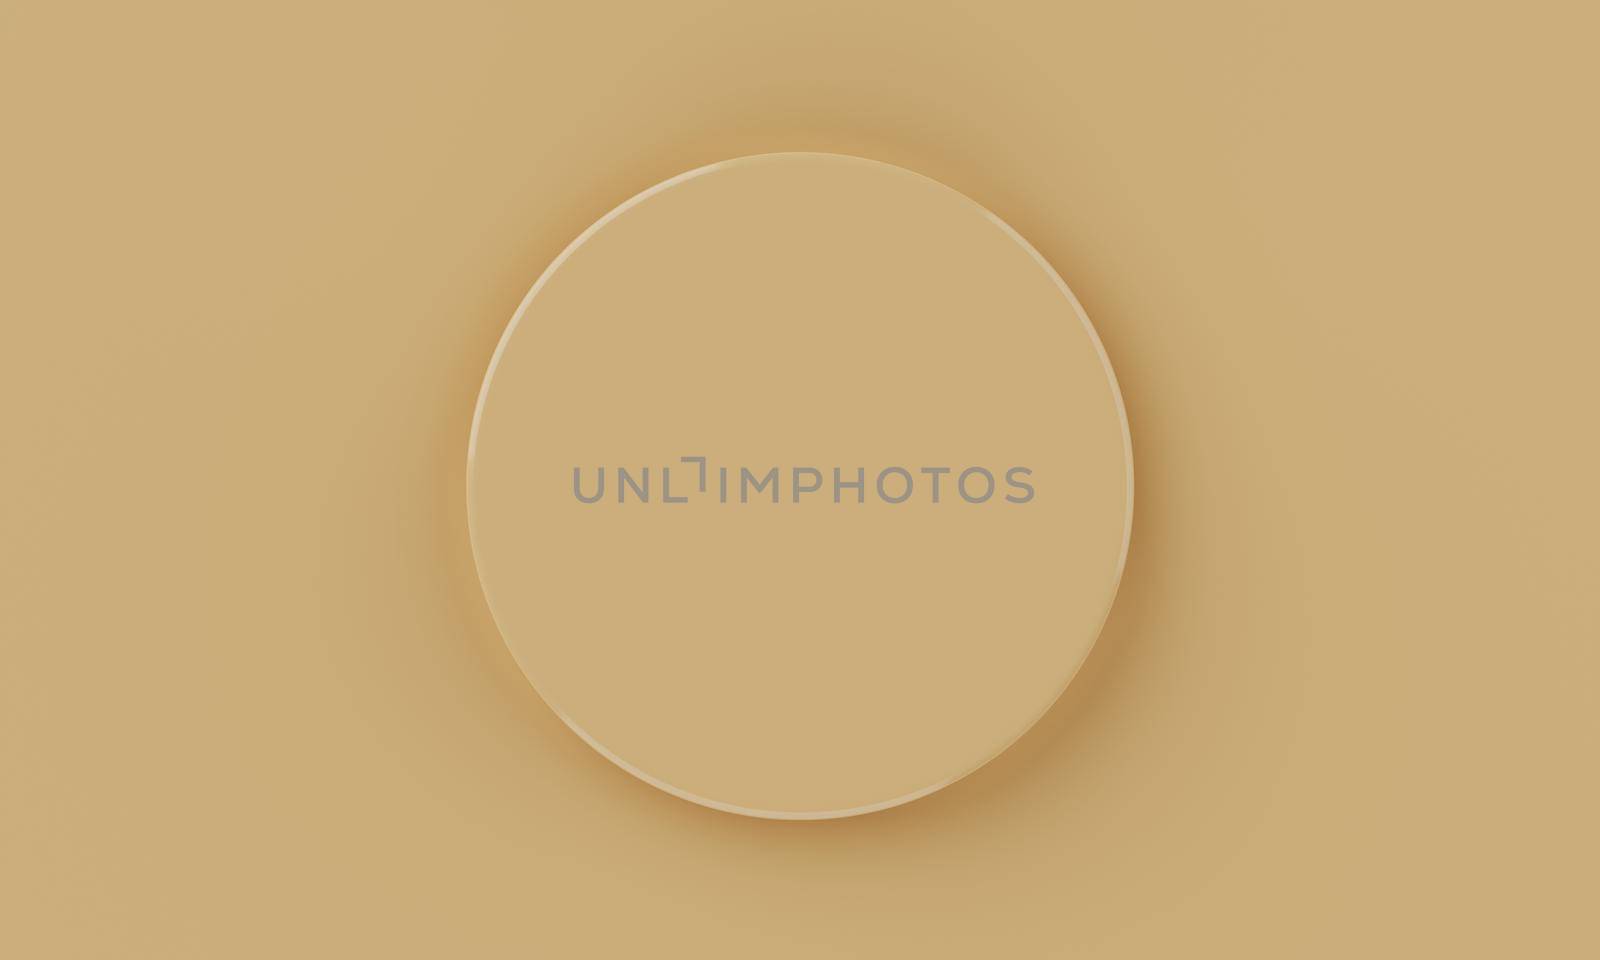 Top view yellow brown minimal circular product podium background. Abstract and object concept. 3D illustration rendering